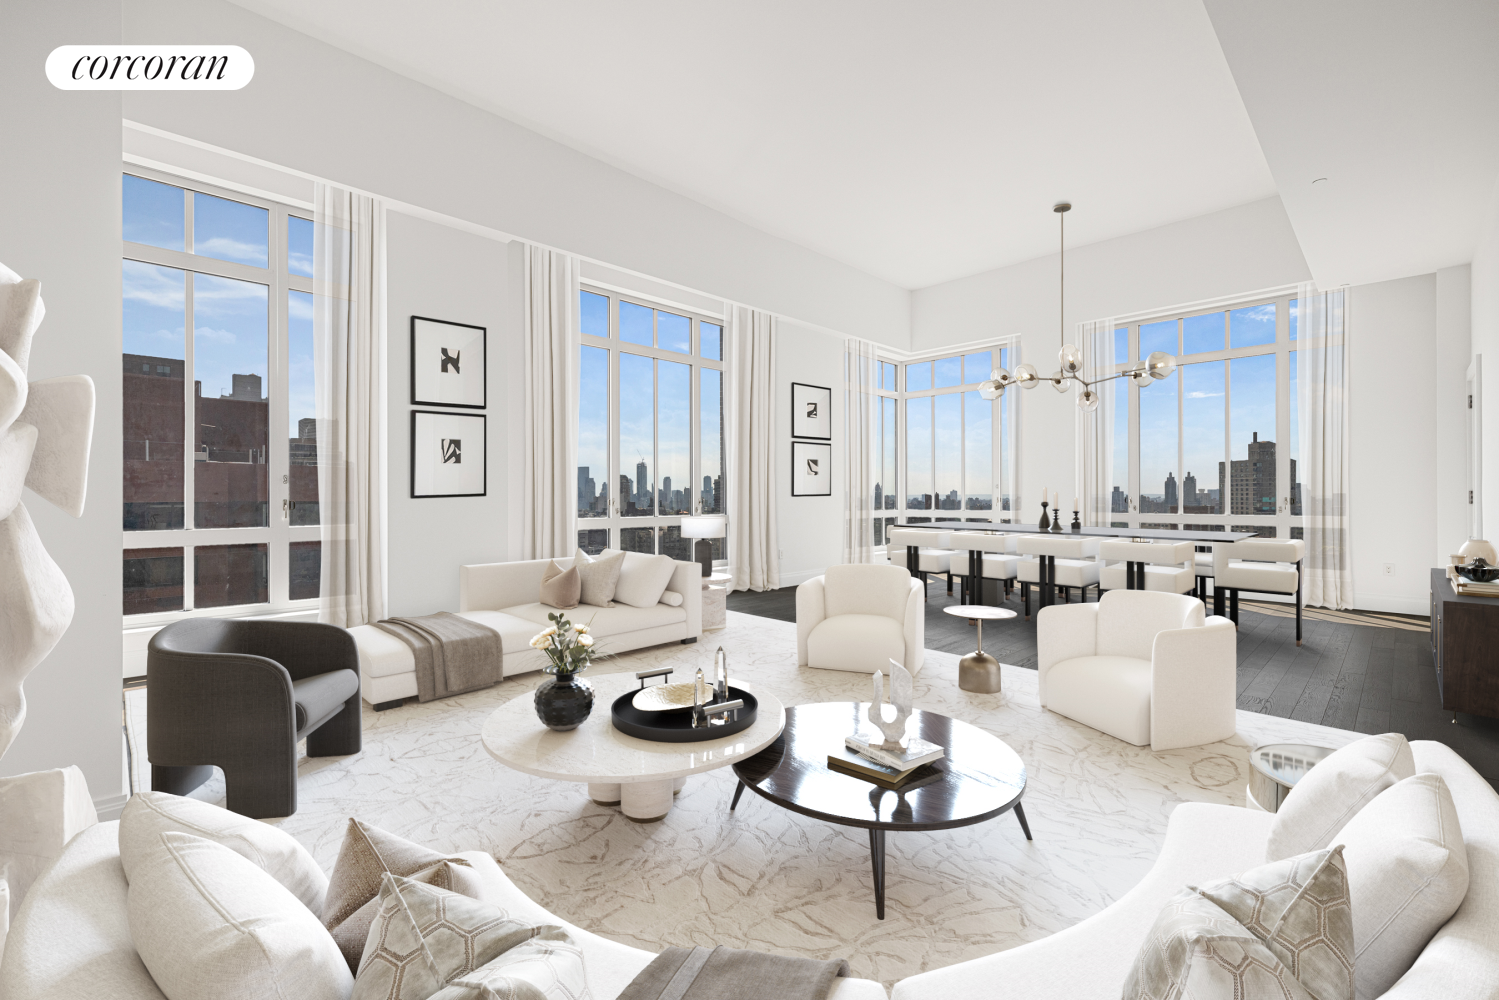 200 East 95th Street 27A, Yorkville, Upper East Side, NYC - 5 Bedrooms  
4.5 Bathrooms  
8 Rooms - 